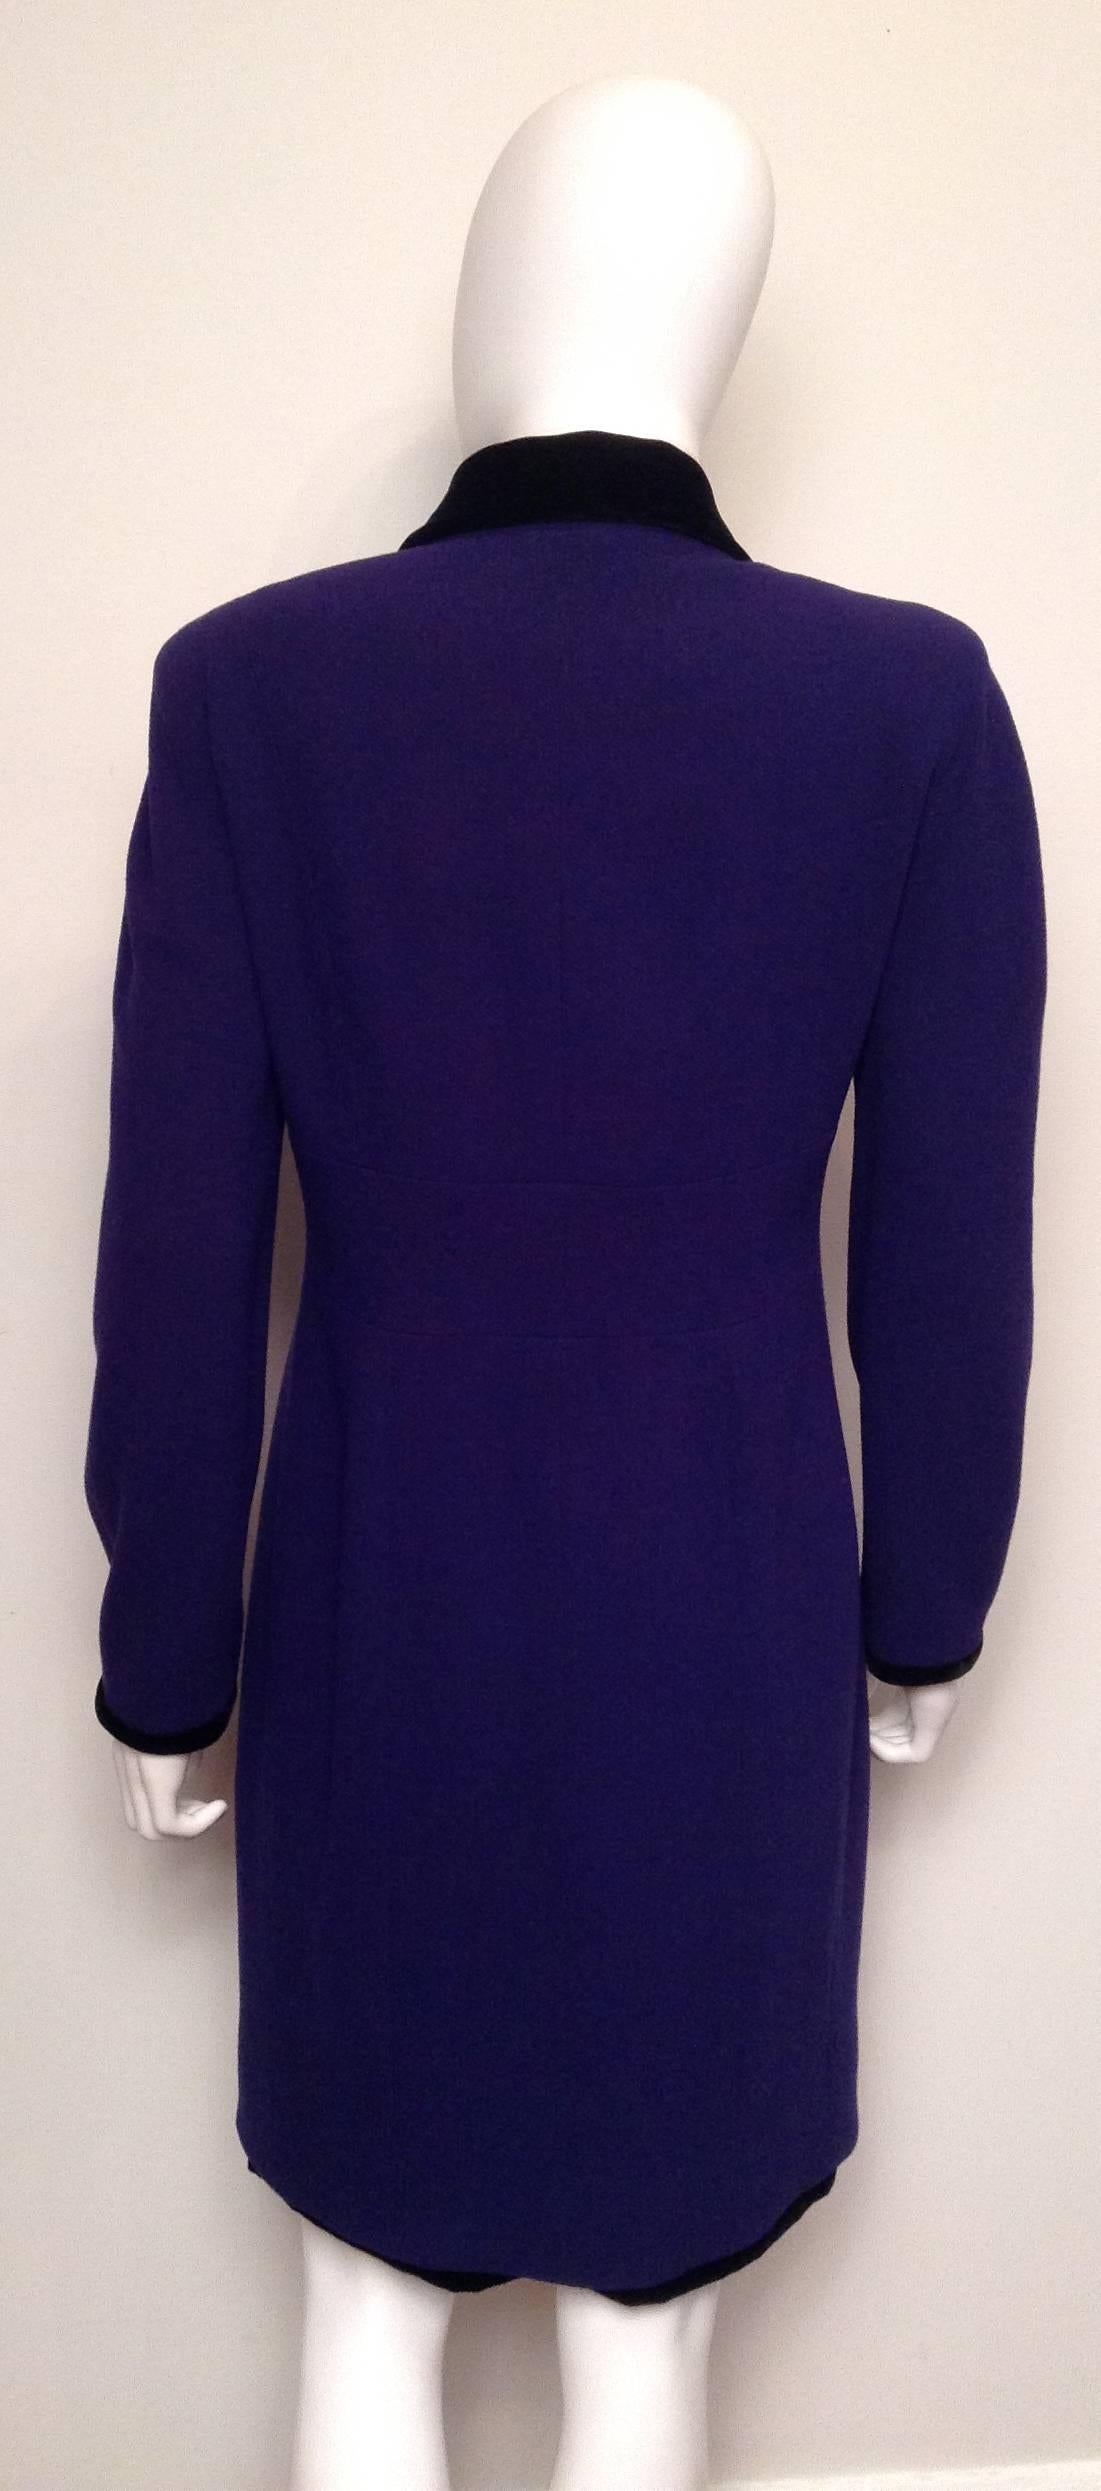 Chanel Purple Double Breasted Velvet and wool Skirt Suit Size 40/6 In Excellent Condition For Sale In Toronto, Ontario